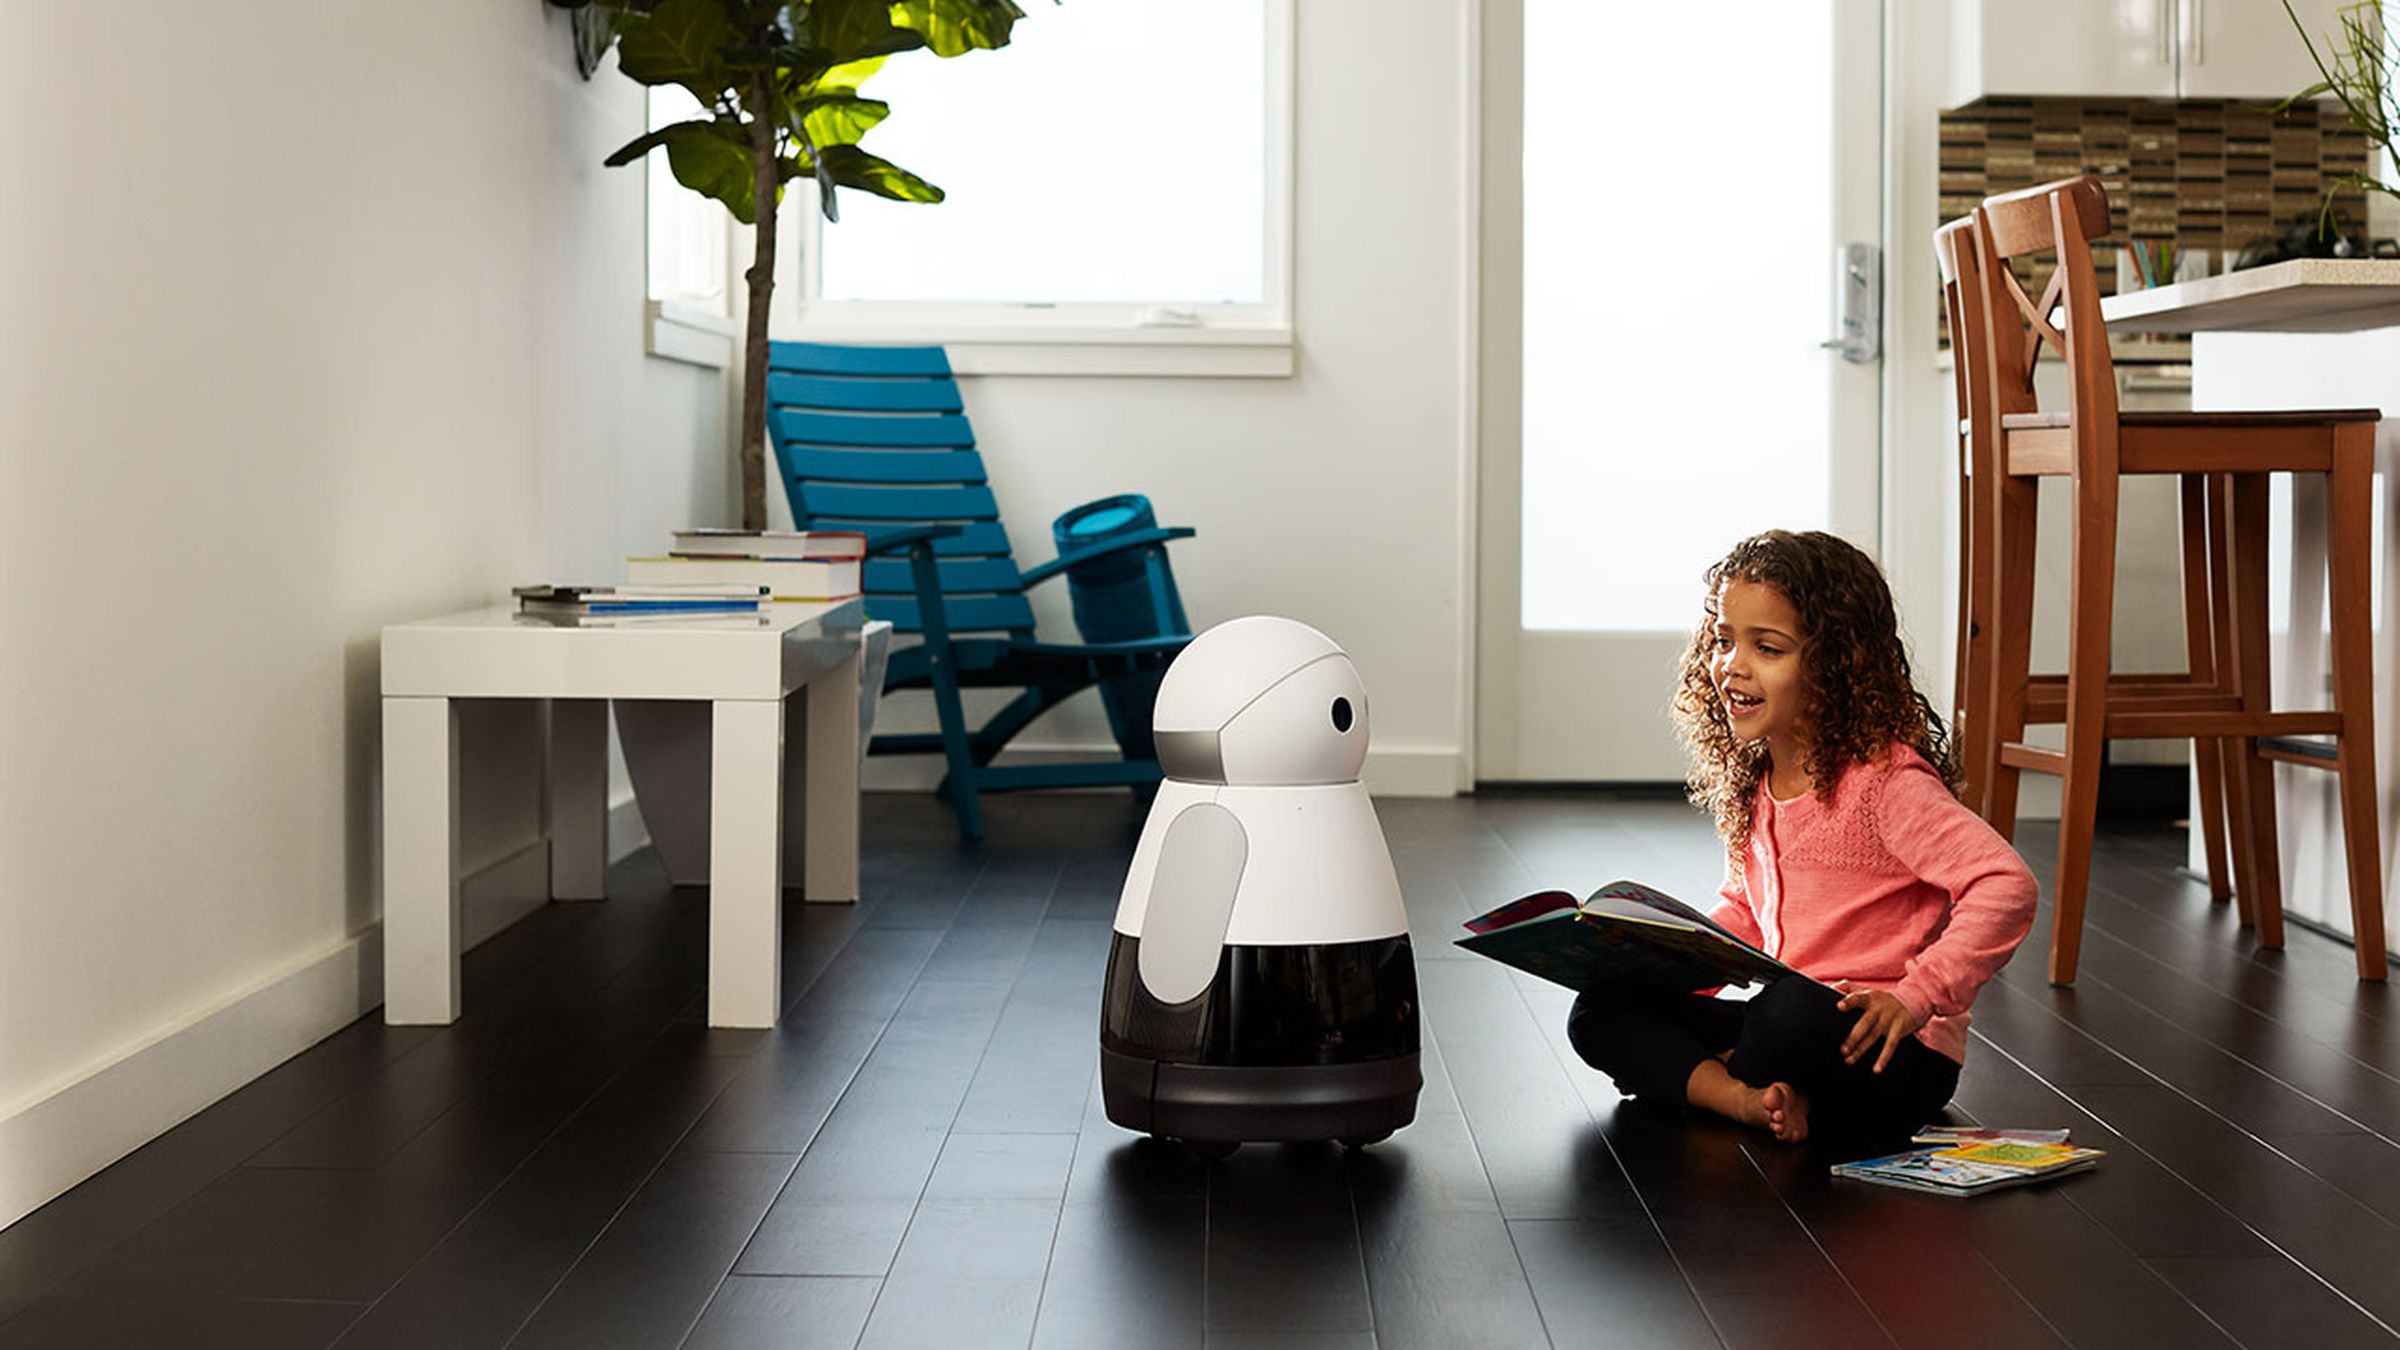 Home robots are often devices like Kuri (above), which is essentially a virtual assistant housed in a mobile robot frame.